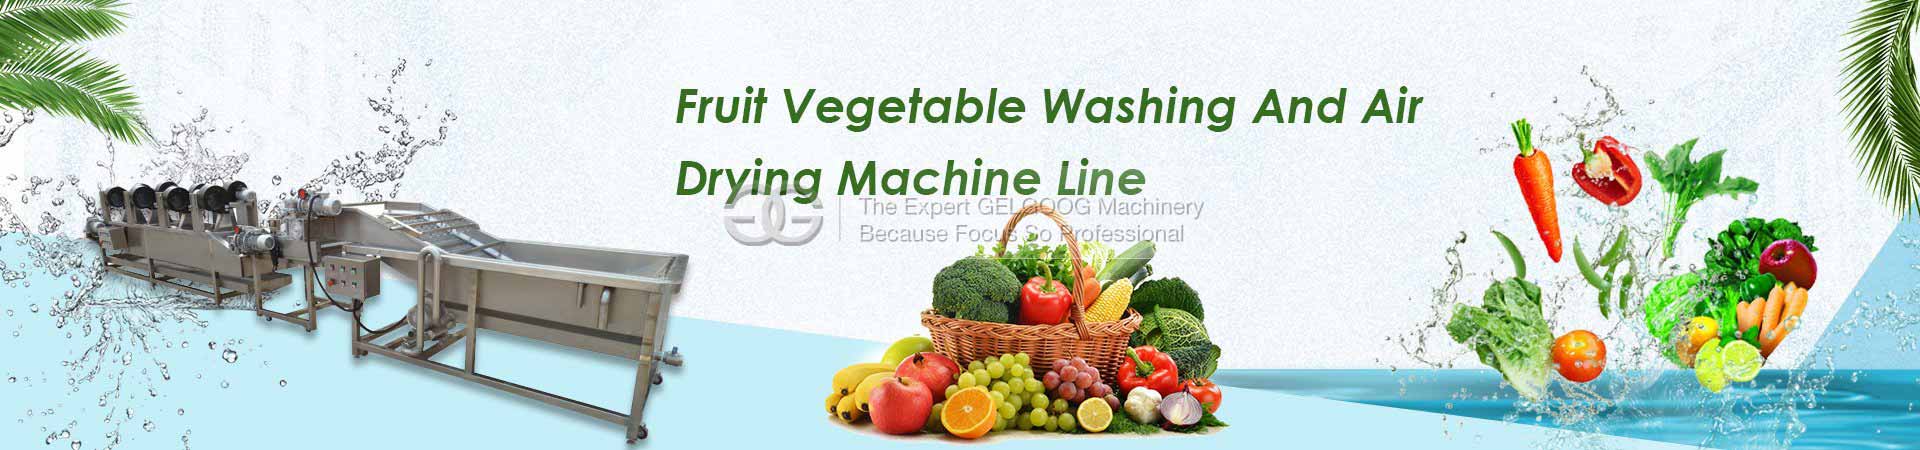 Fruit Vegetable washing and Air Drying machine 